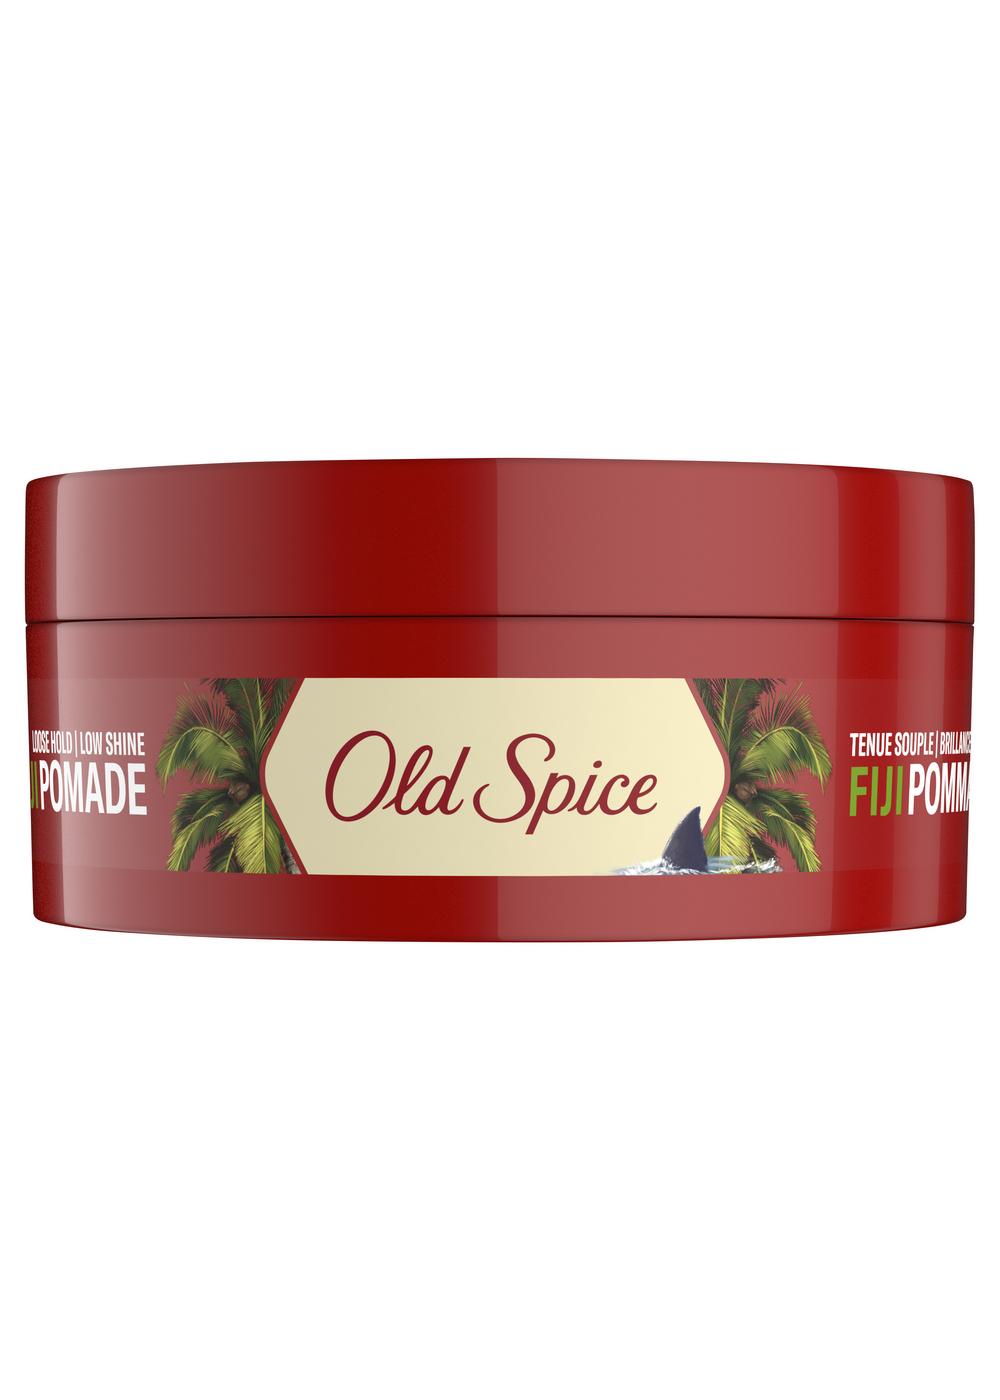 Old Spice Fiji Hair Styling Pomade for Men; image 2 of 9